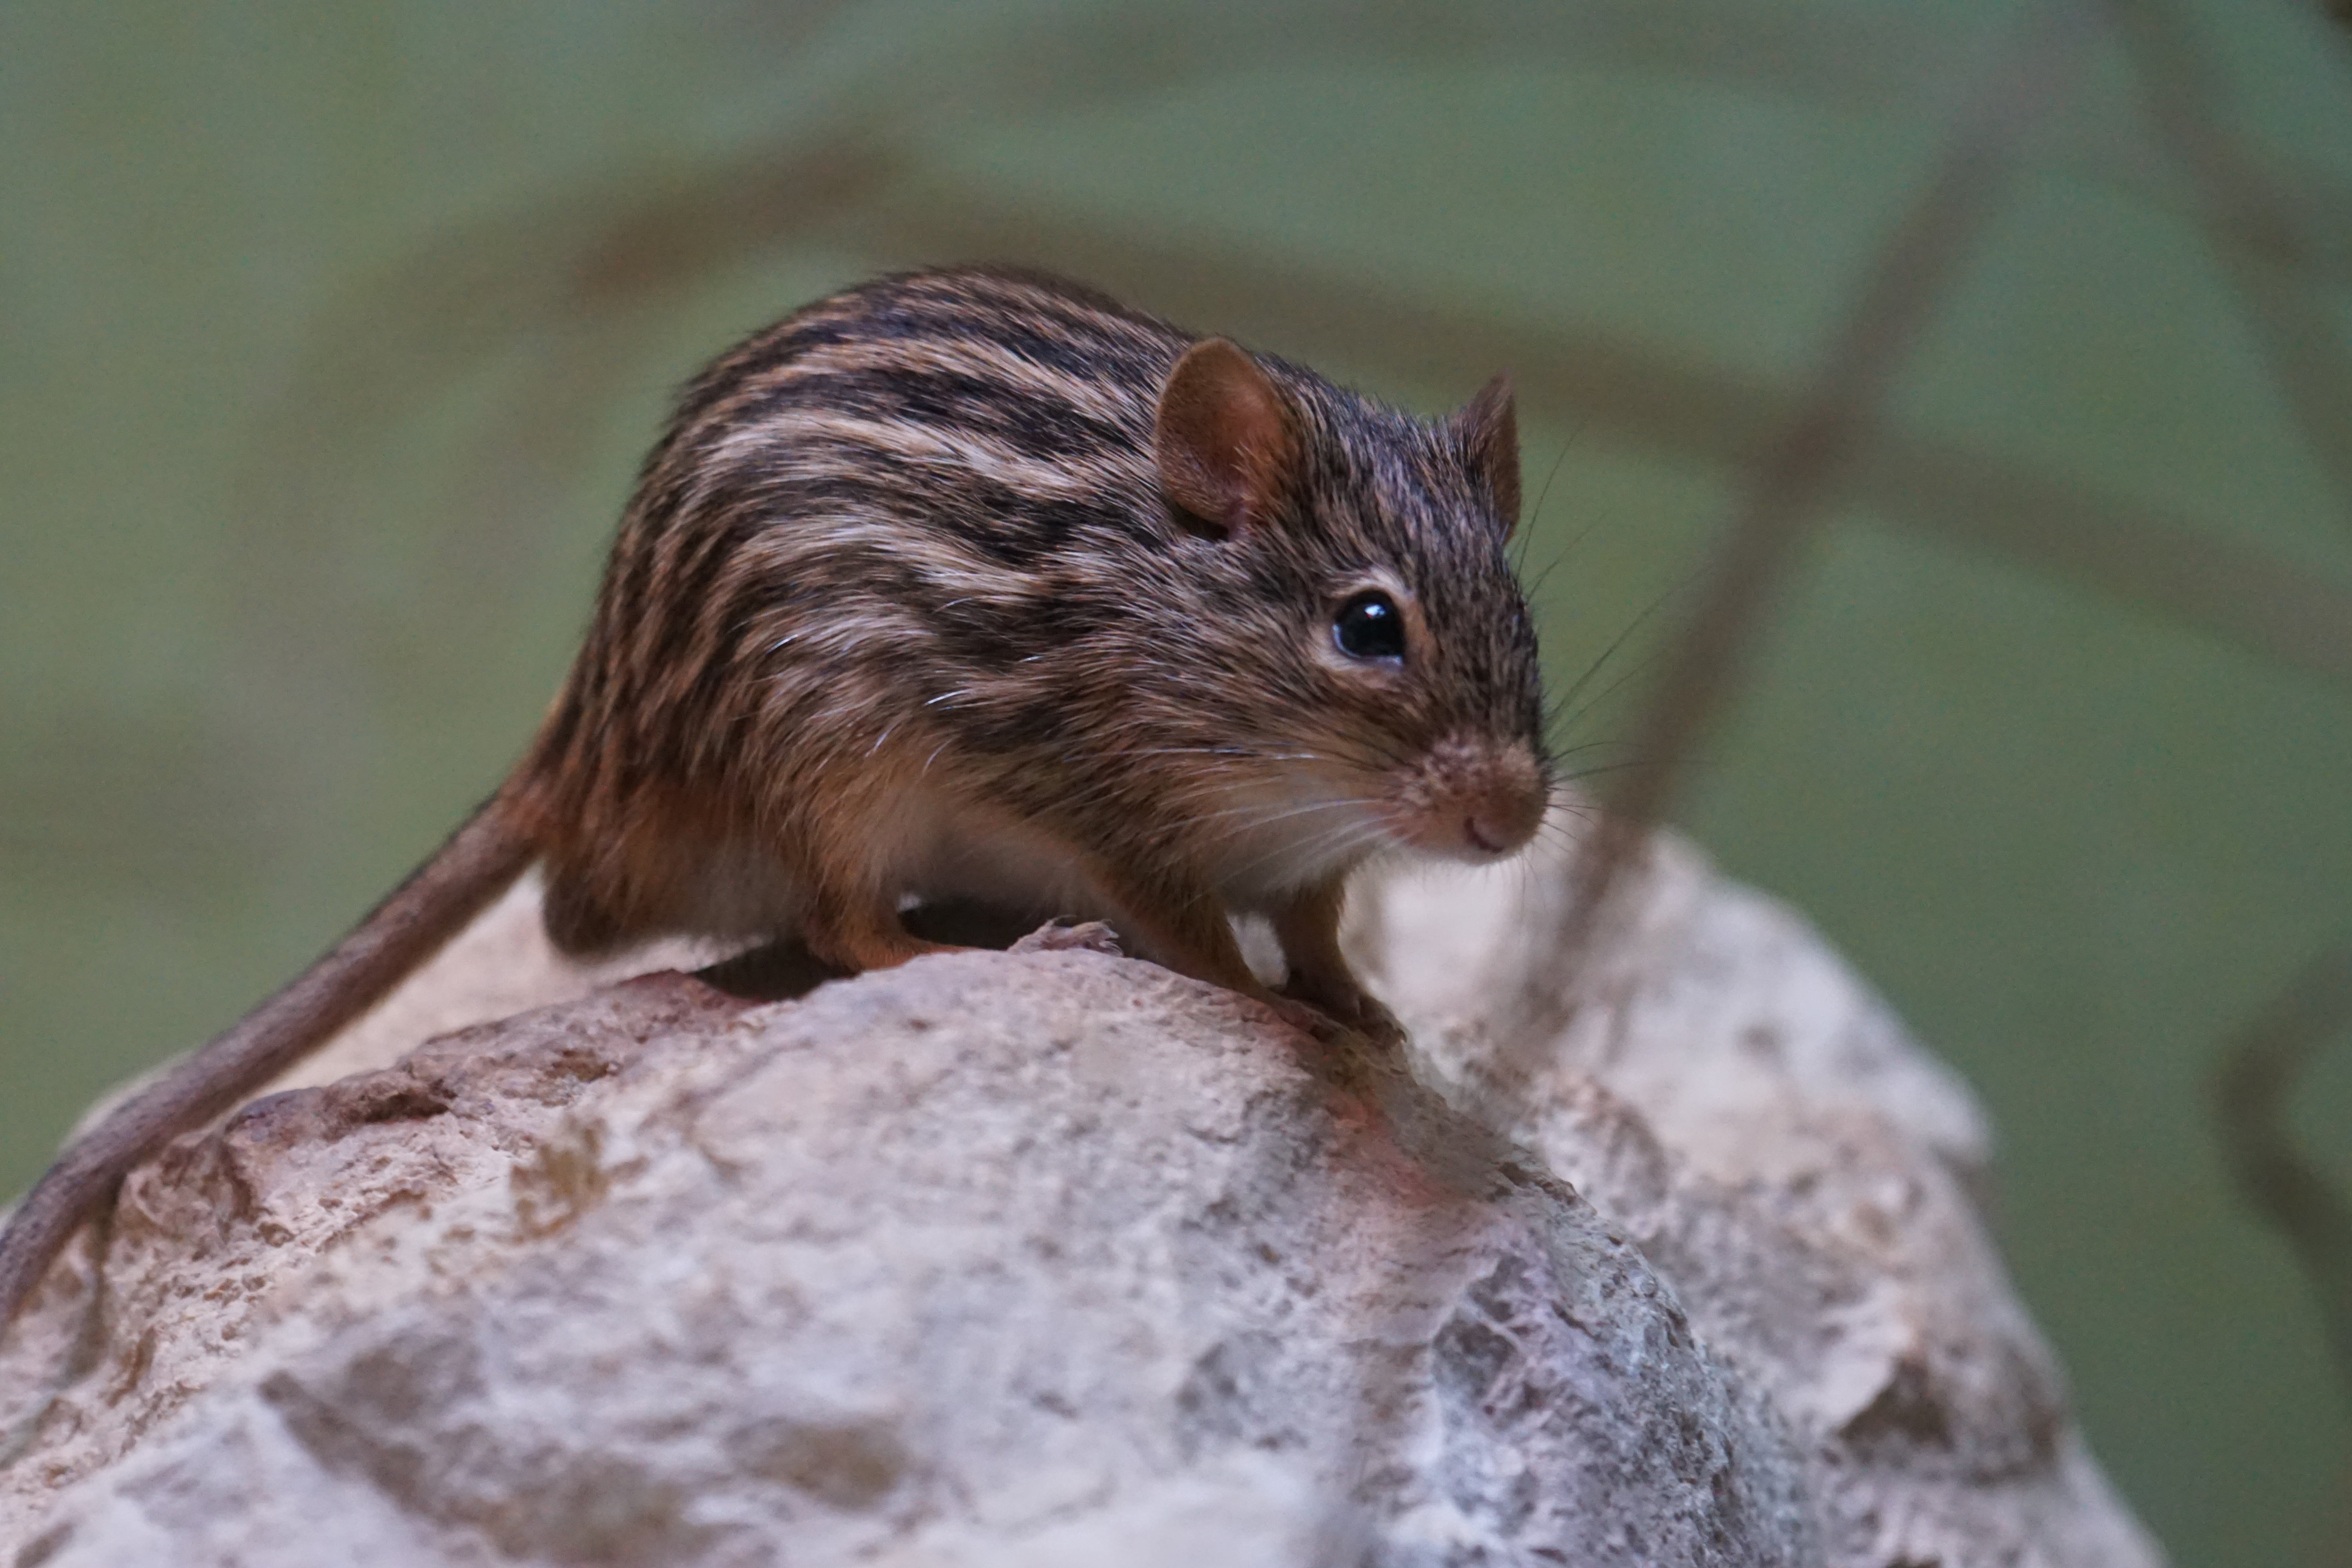 black and brown mouse, striped, rodent, animal, mammal, wildlife